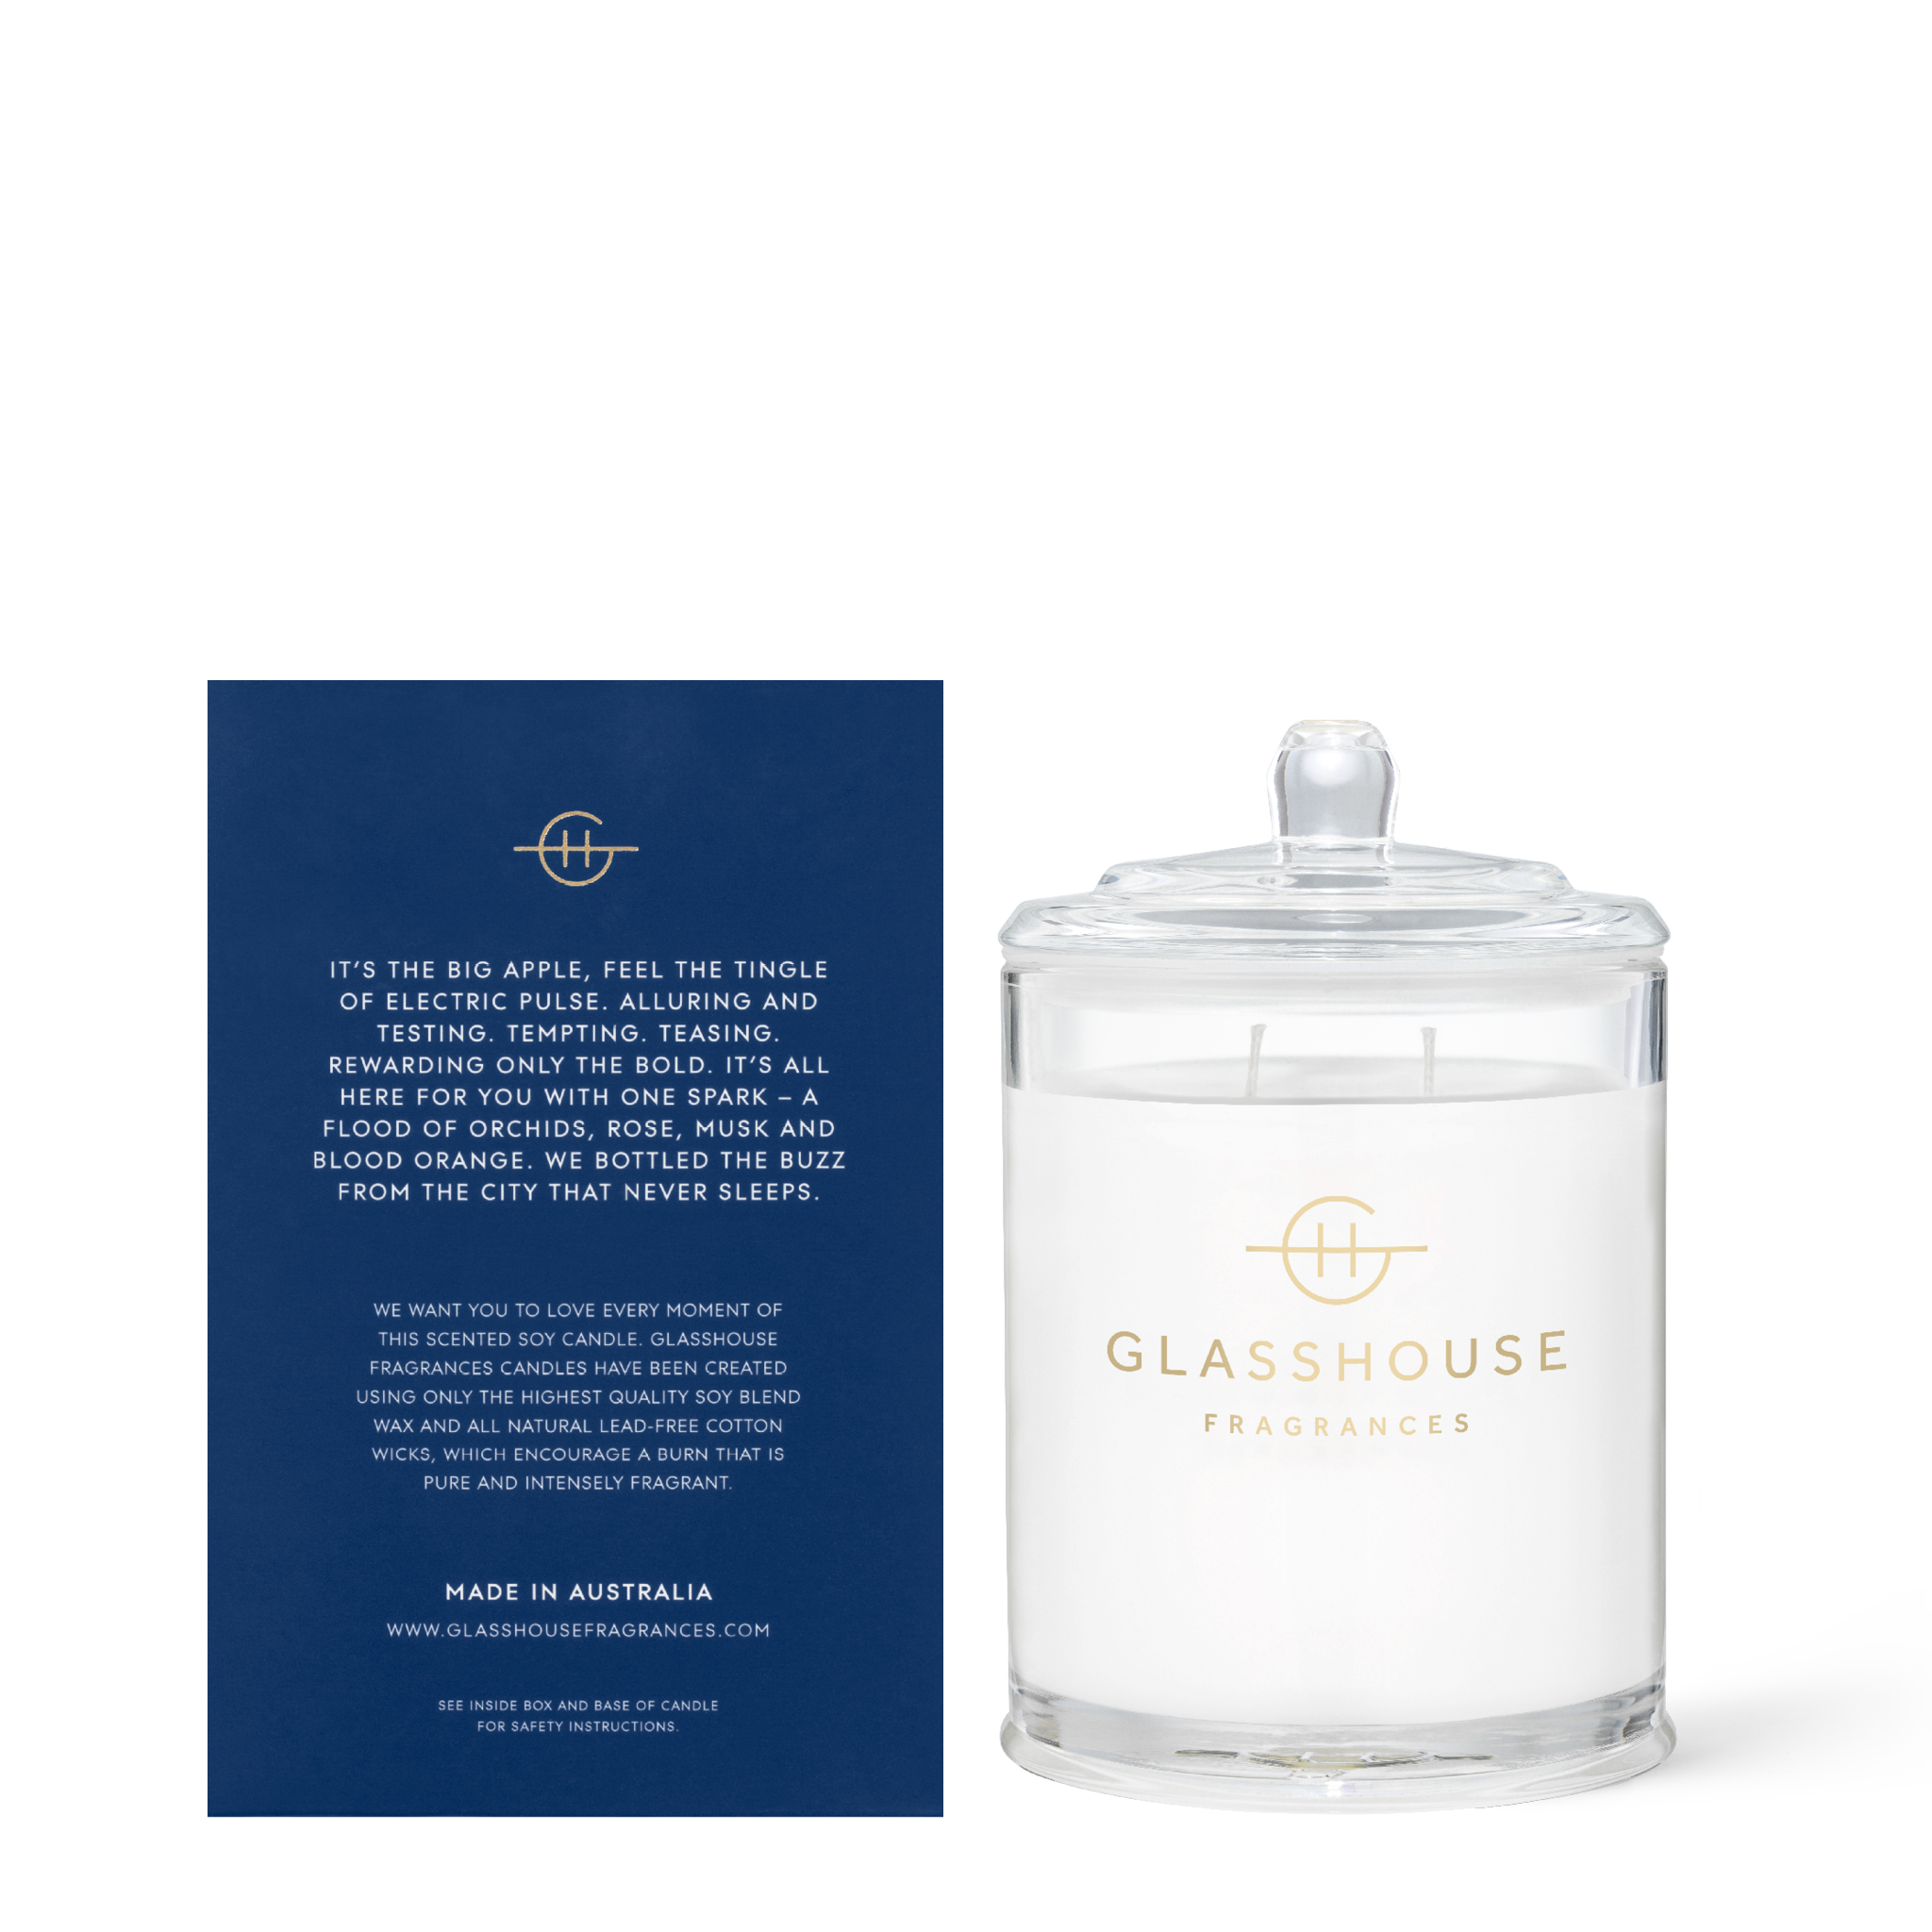 Glasshouse Fragrances I'll Take Manhattan Orchids and Blood Orange  380g Soy Candle with box - back of product shot